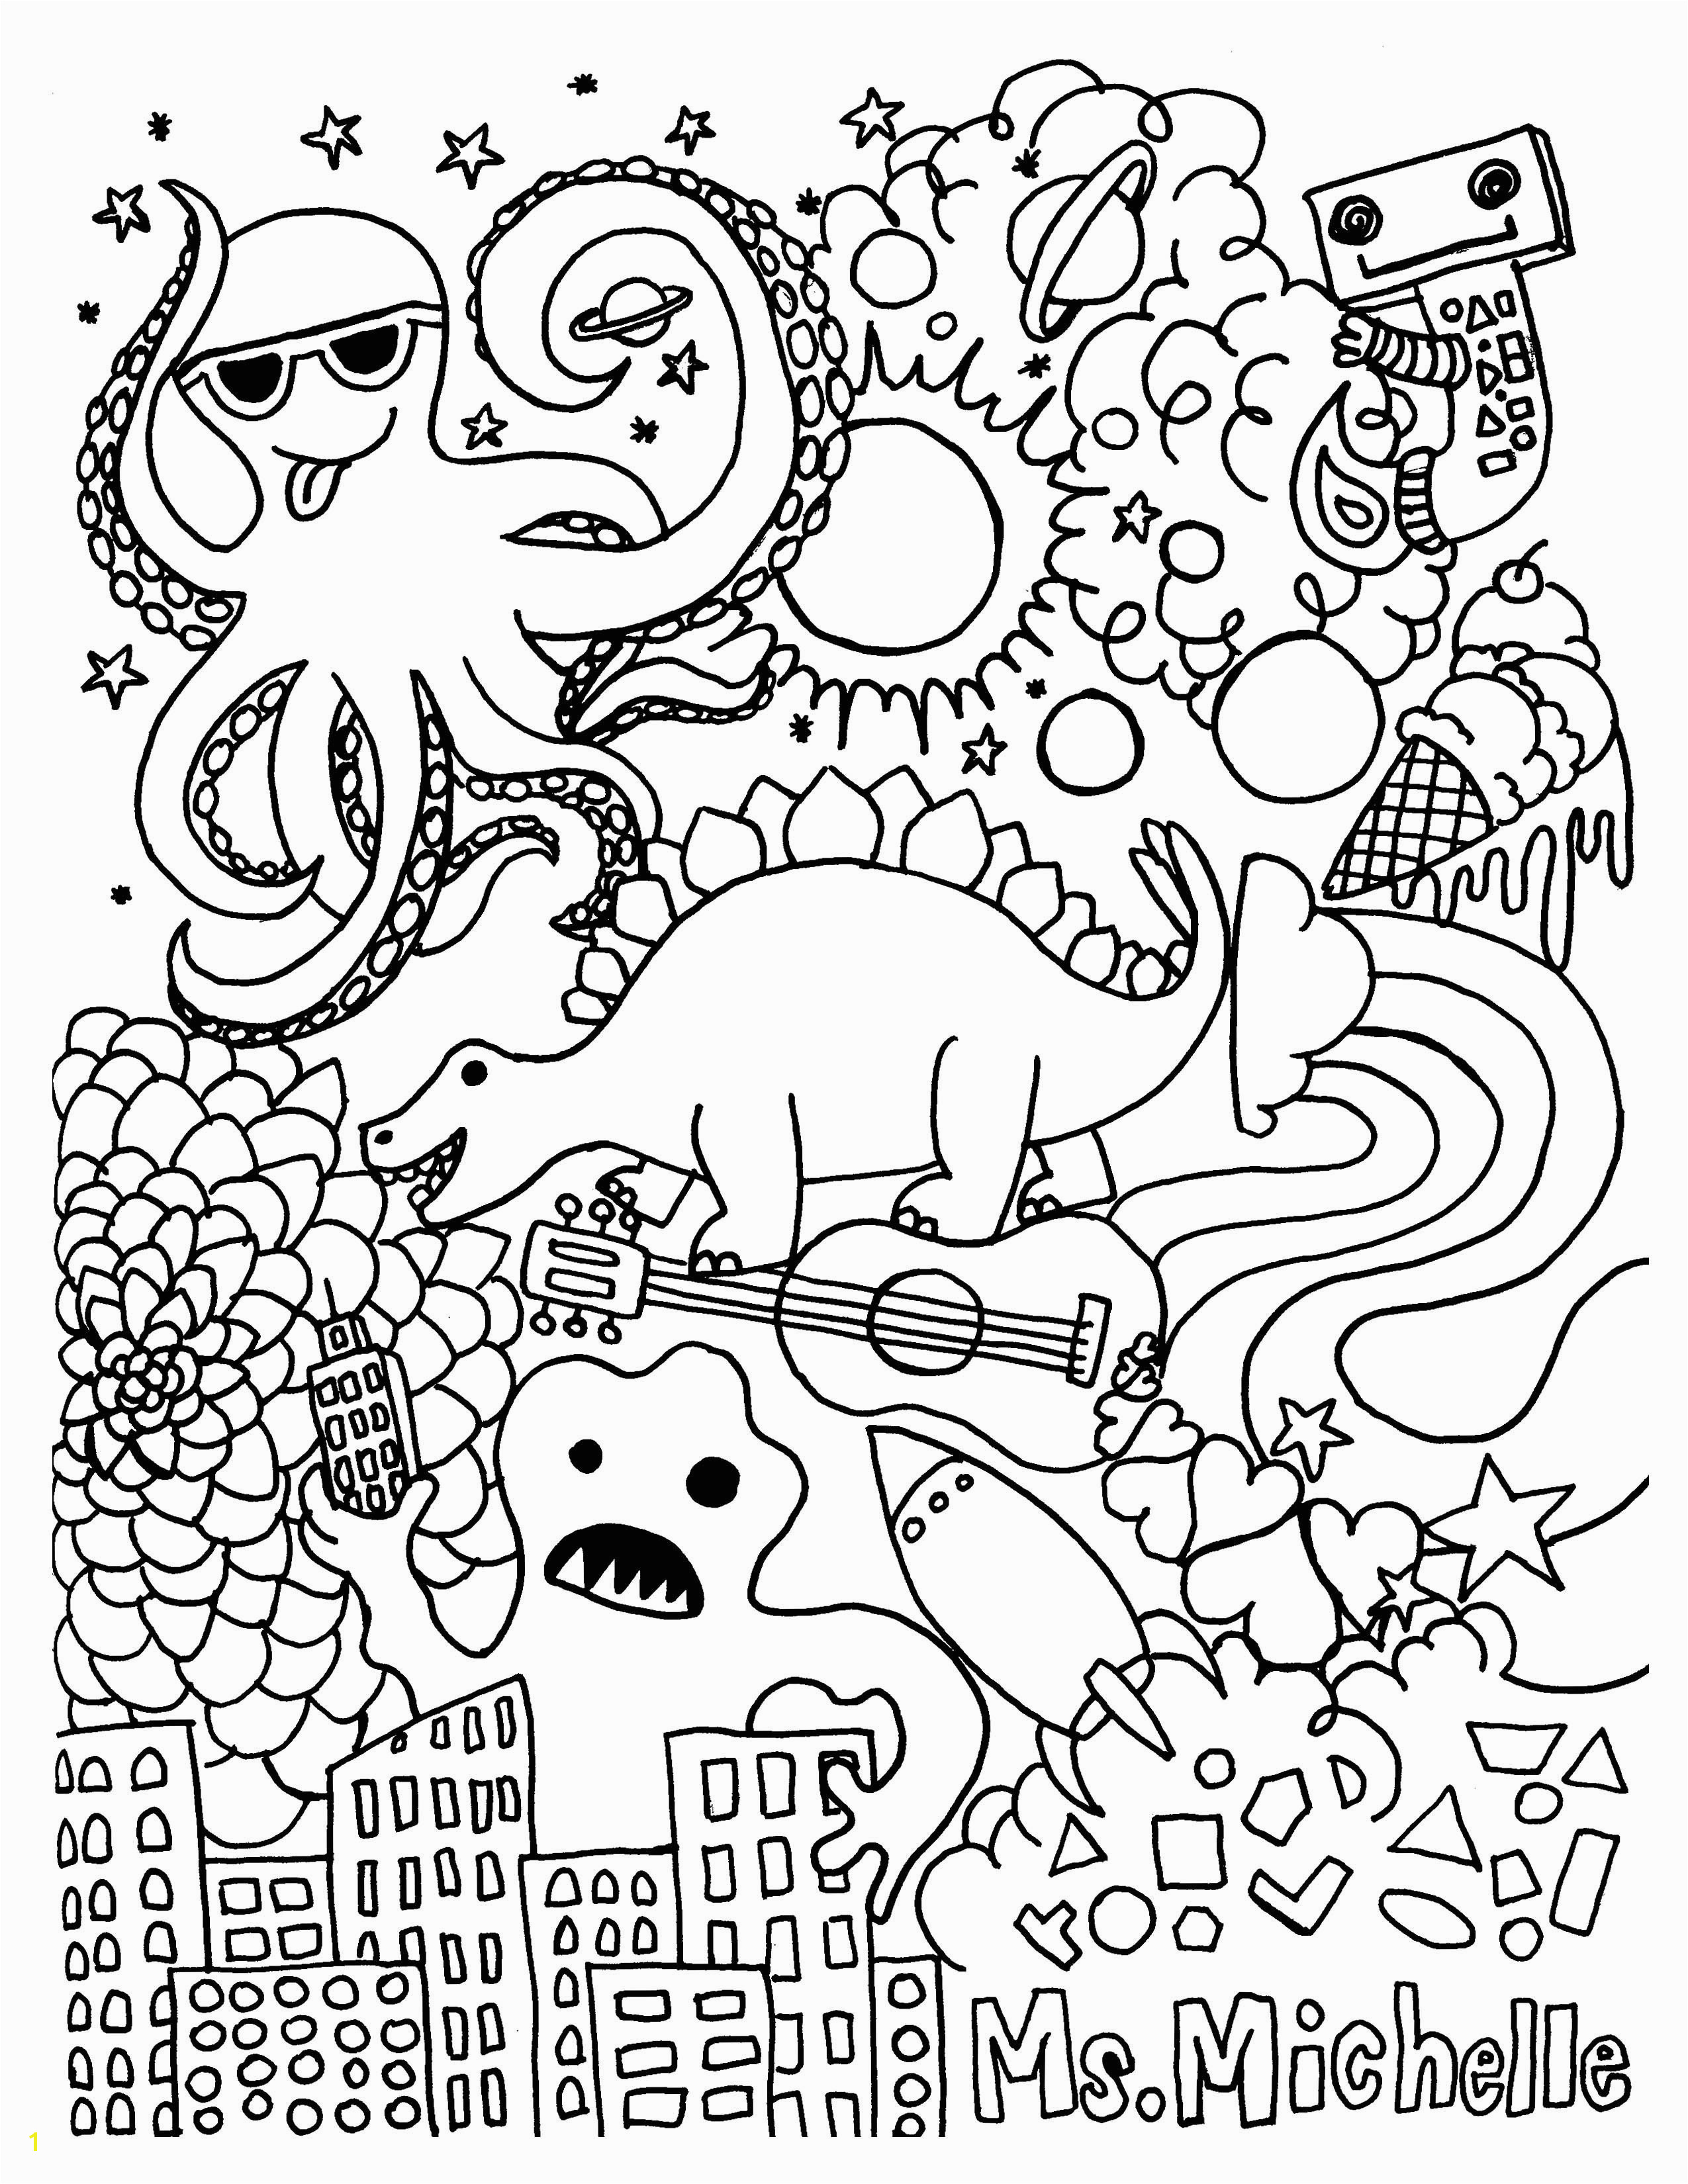 Electrical Safety Coloring Pages Lovely Summer Safety Coloring Pages Internet Safety Coloring Pages Summer 21